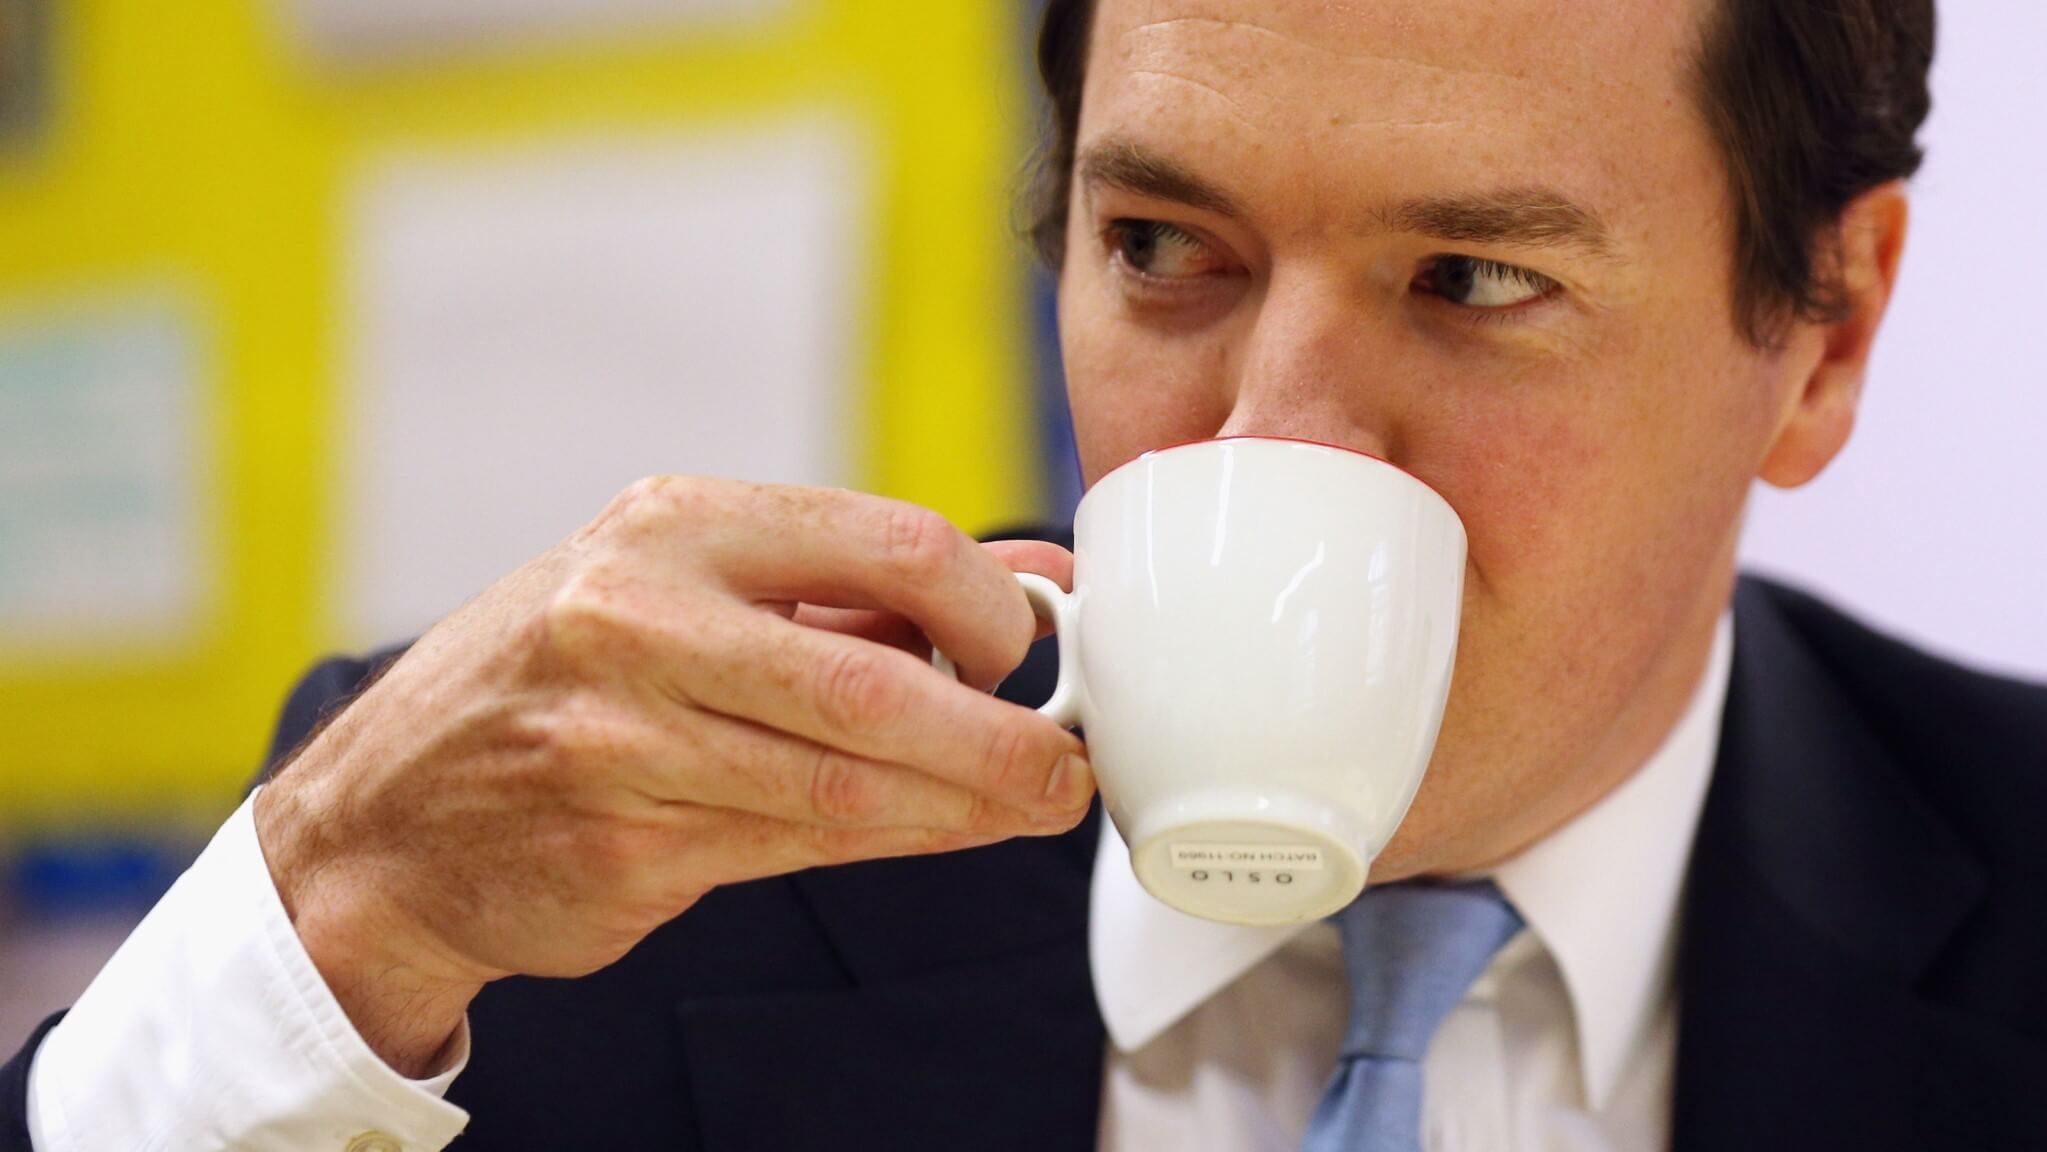 Budget 2016:  What Do The Chancellor’s Announcements Mean For SMEs?